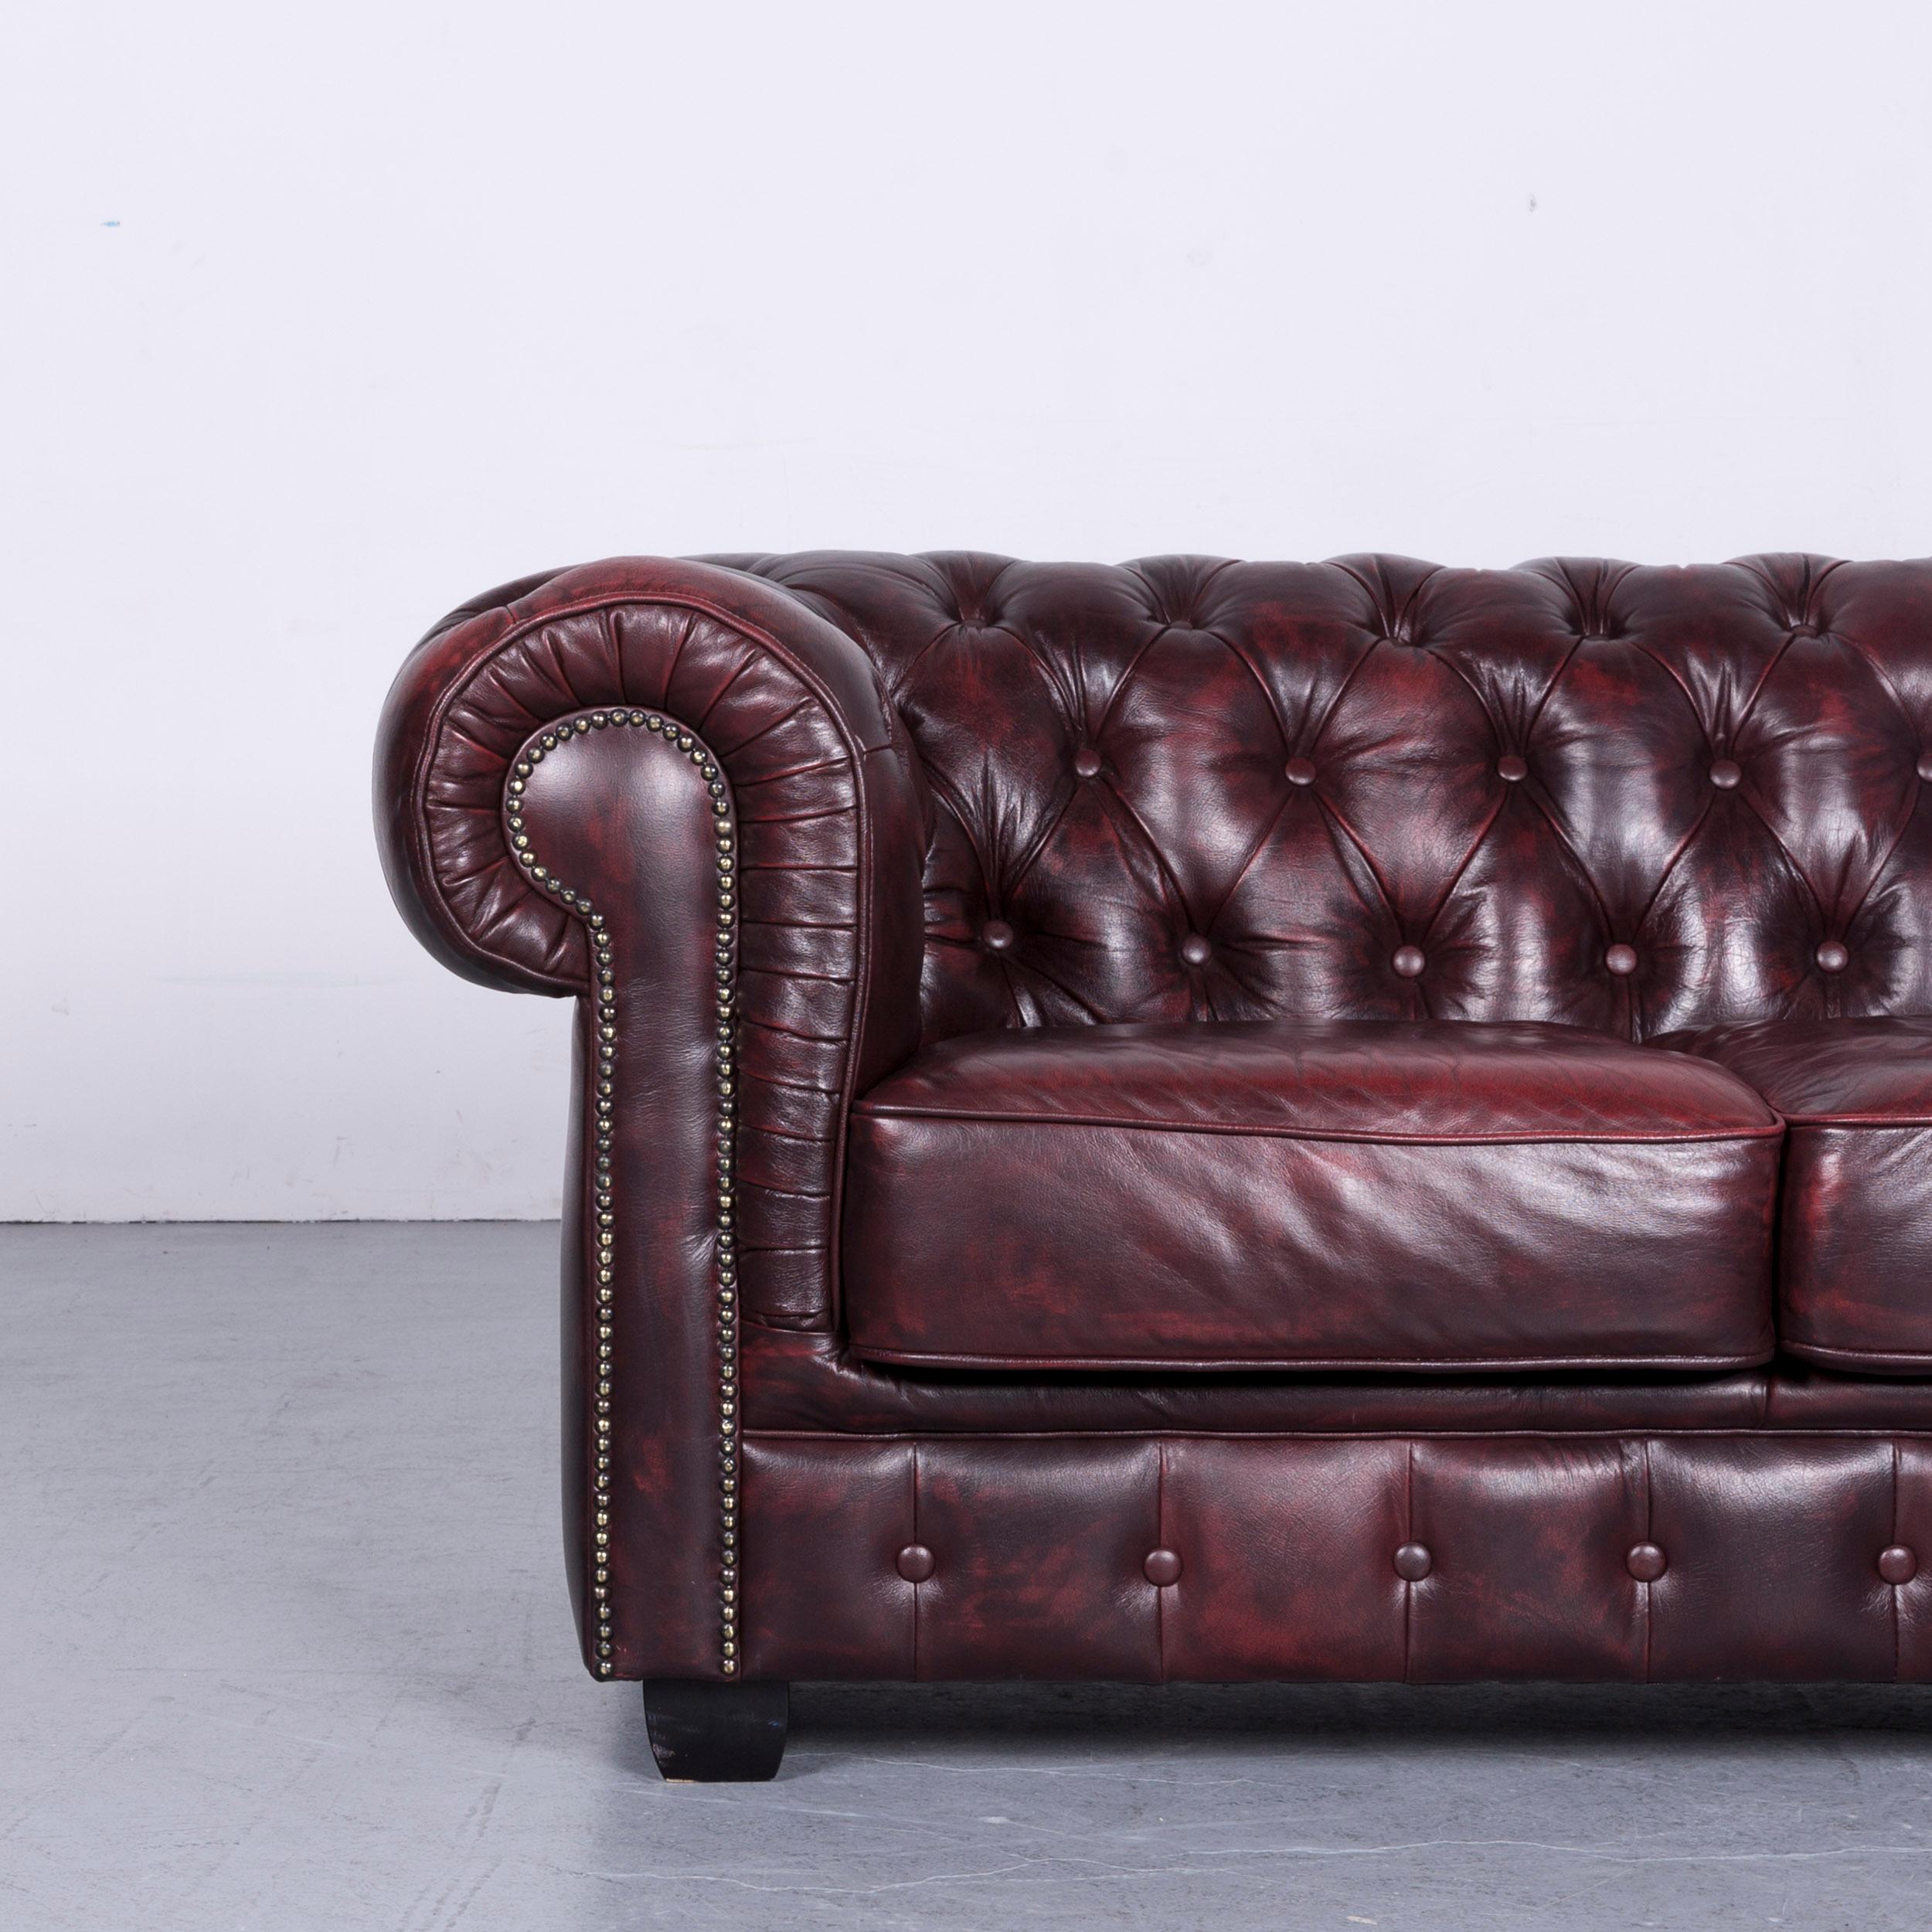 Chesterfield Leather Sofa Brown Three-Seat Couch Vintage Retro 9